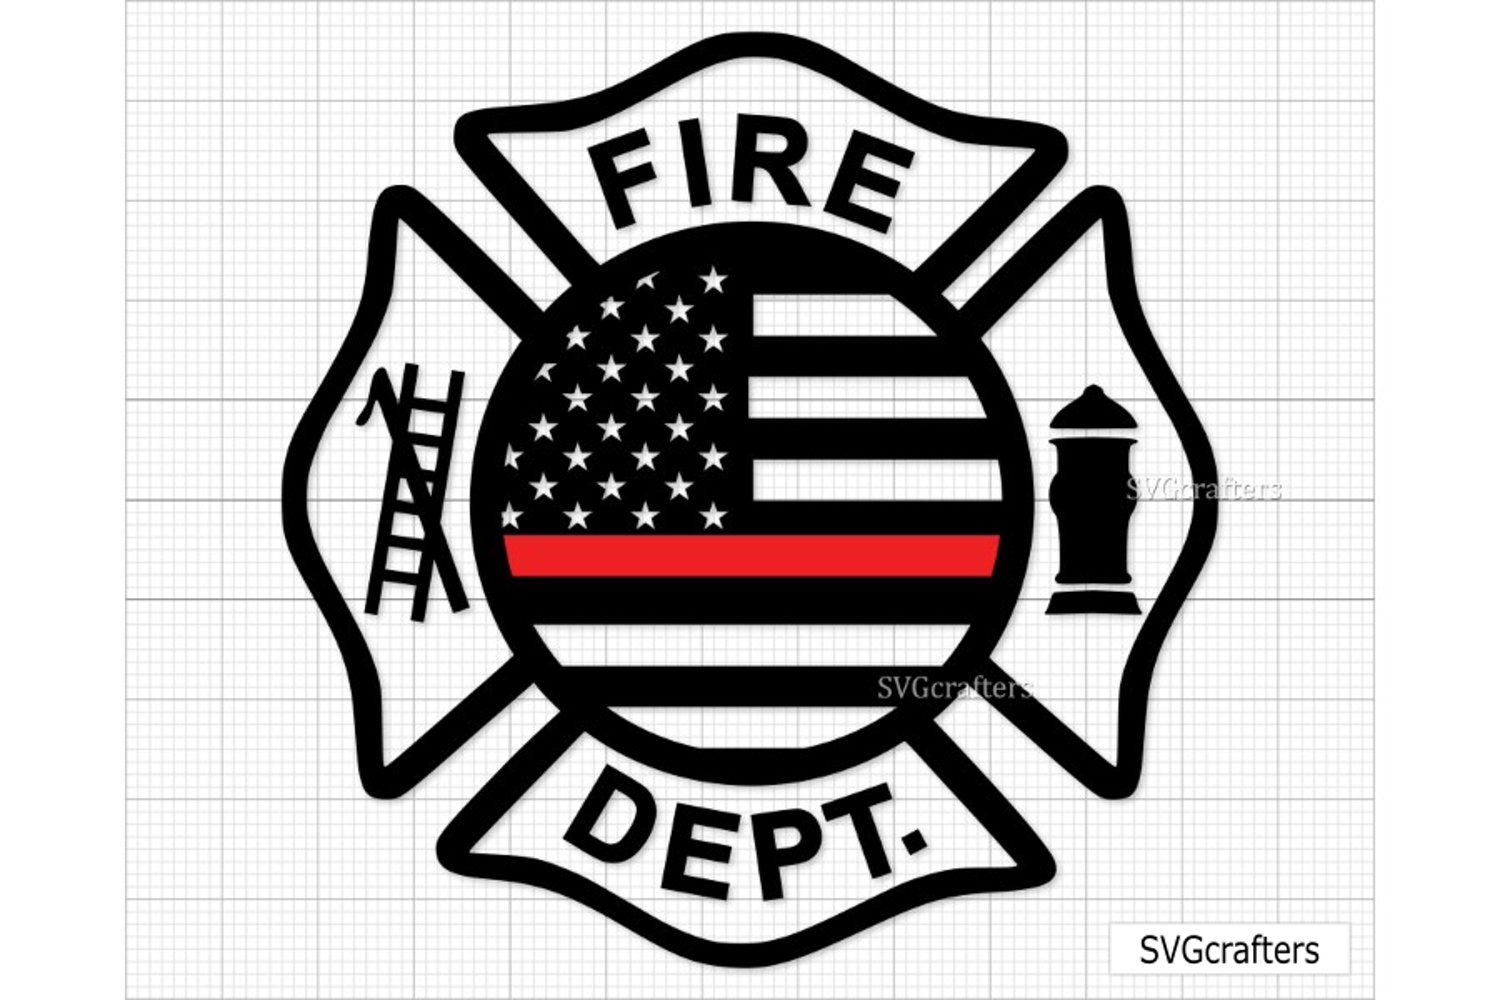 Fire logo with American Flag.